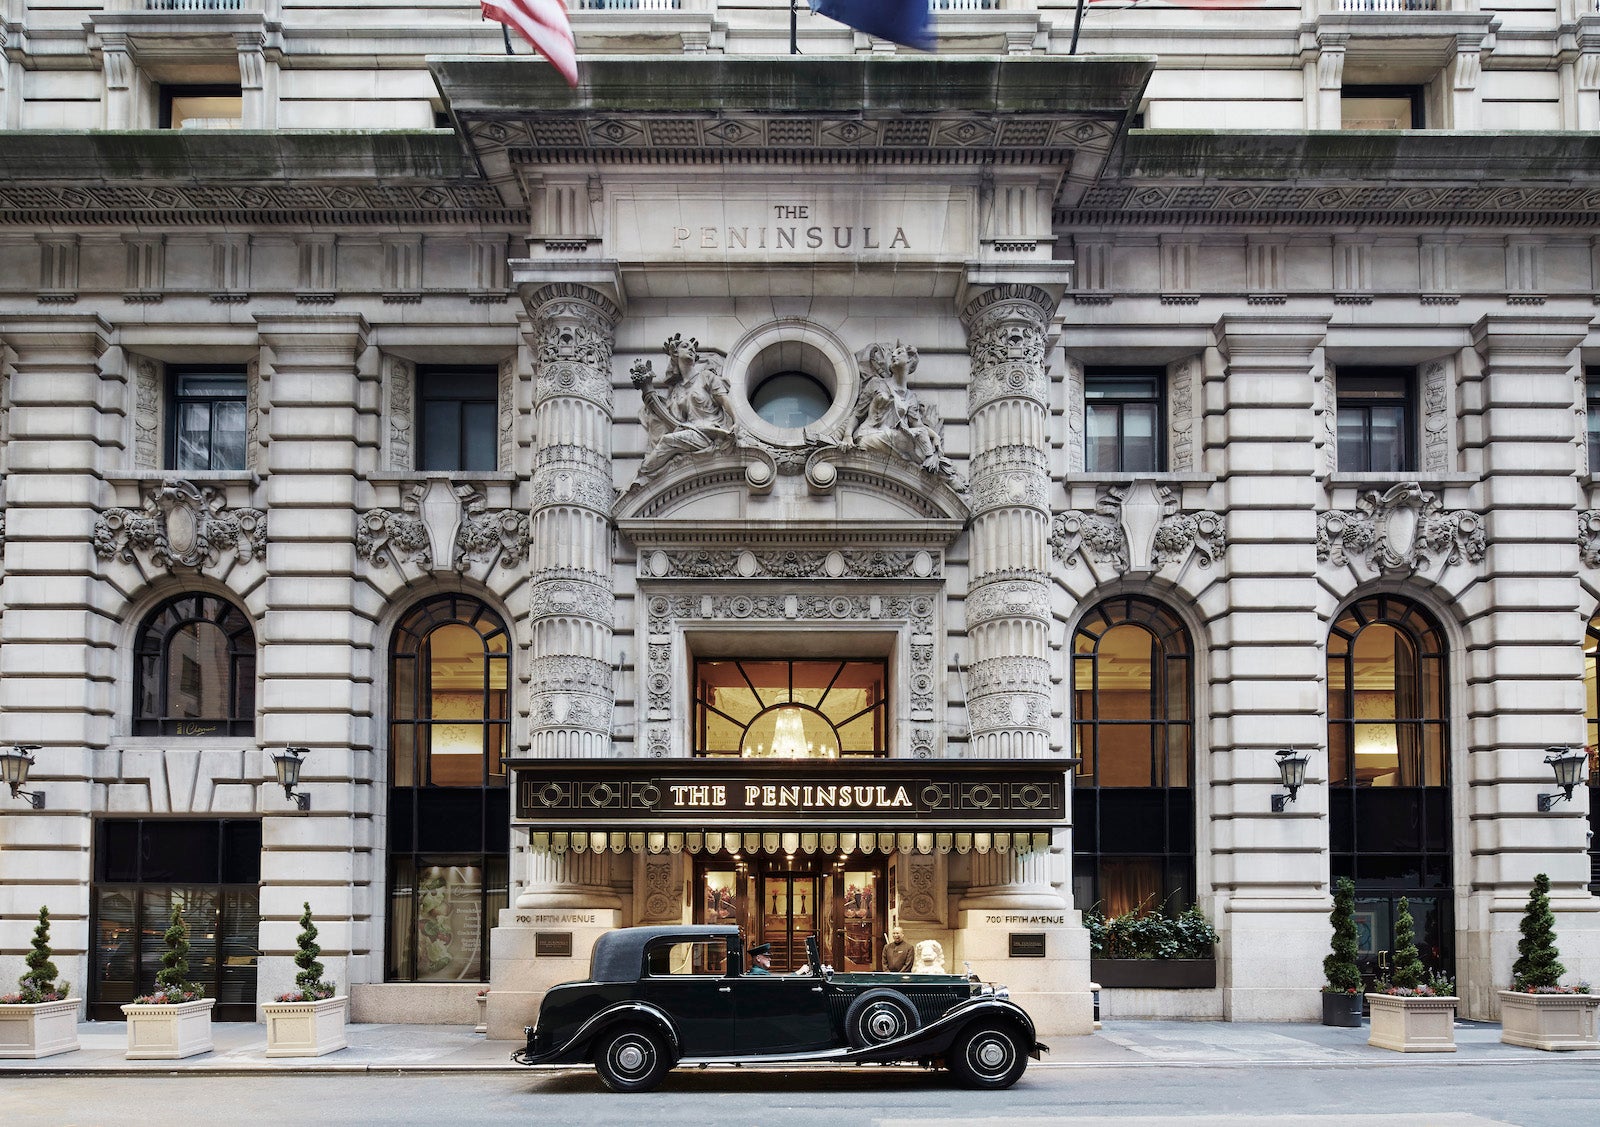 Entrance of The Peninsula in New York City